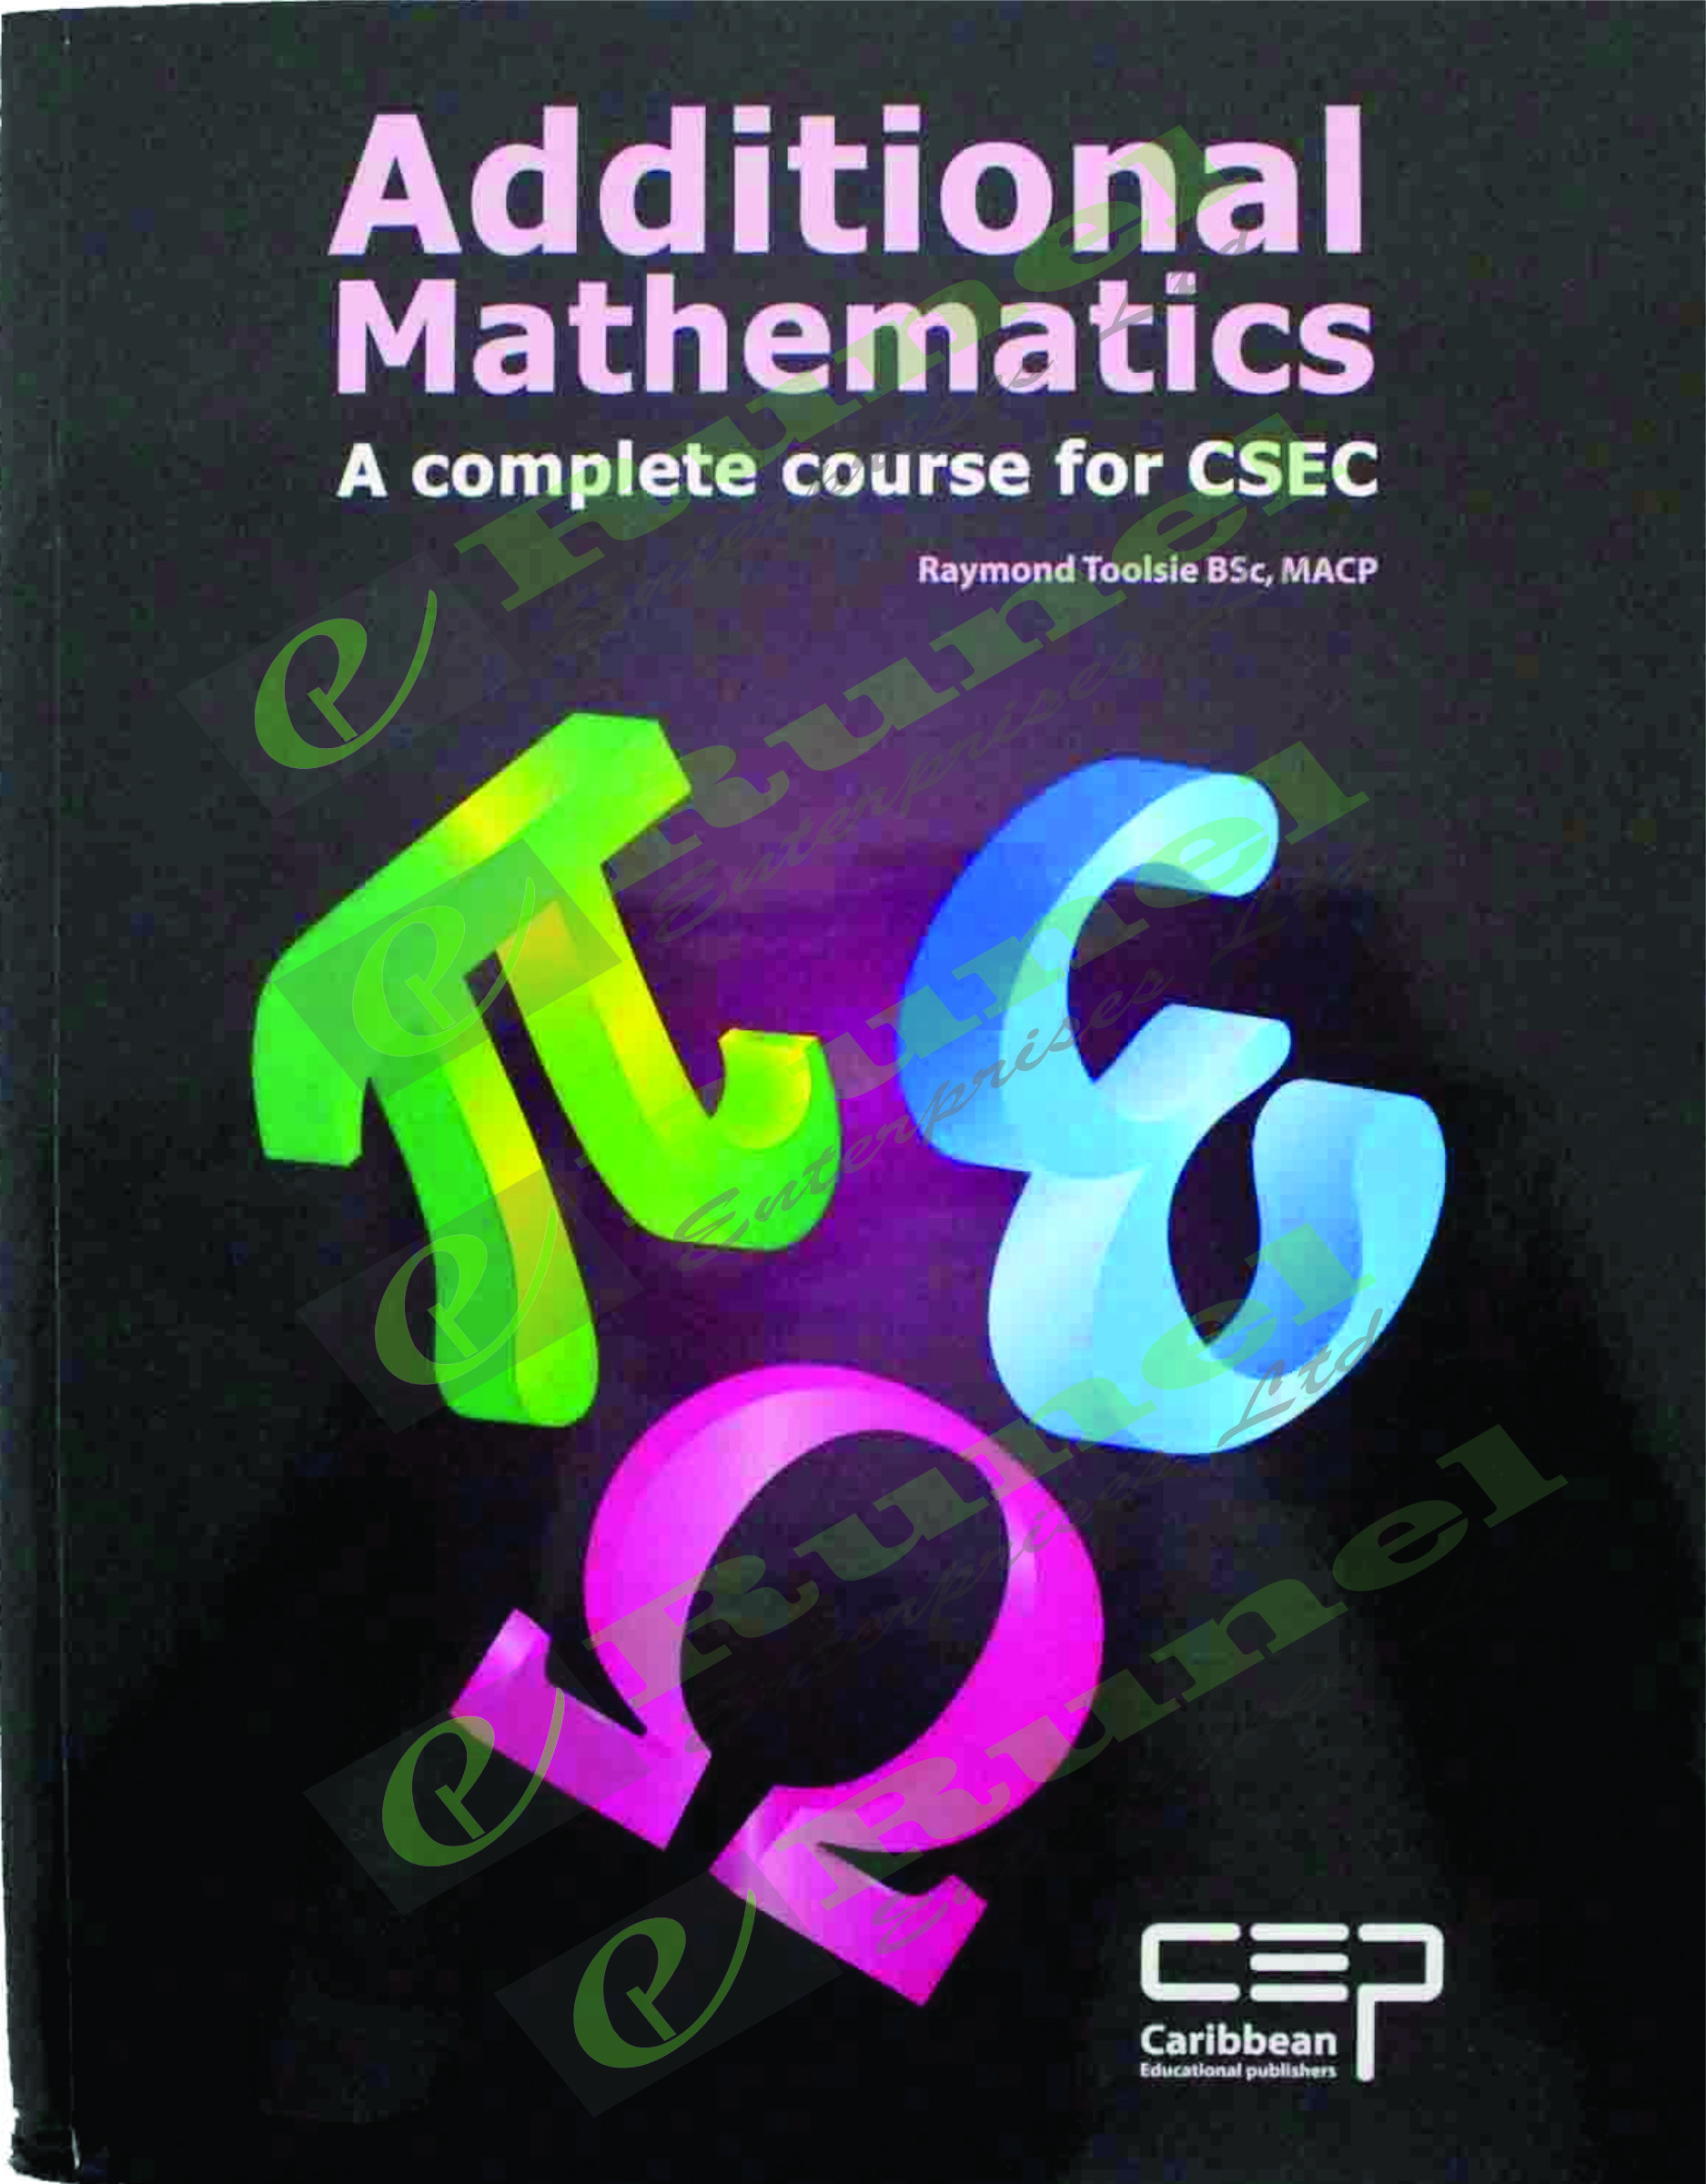 Additional Mathematics A complete course for CSEC